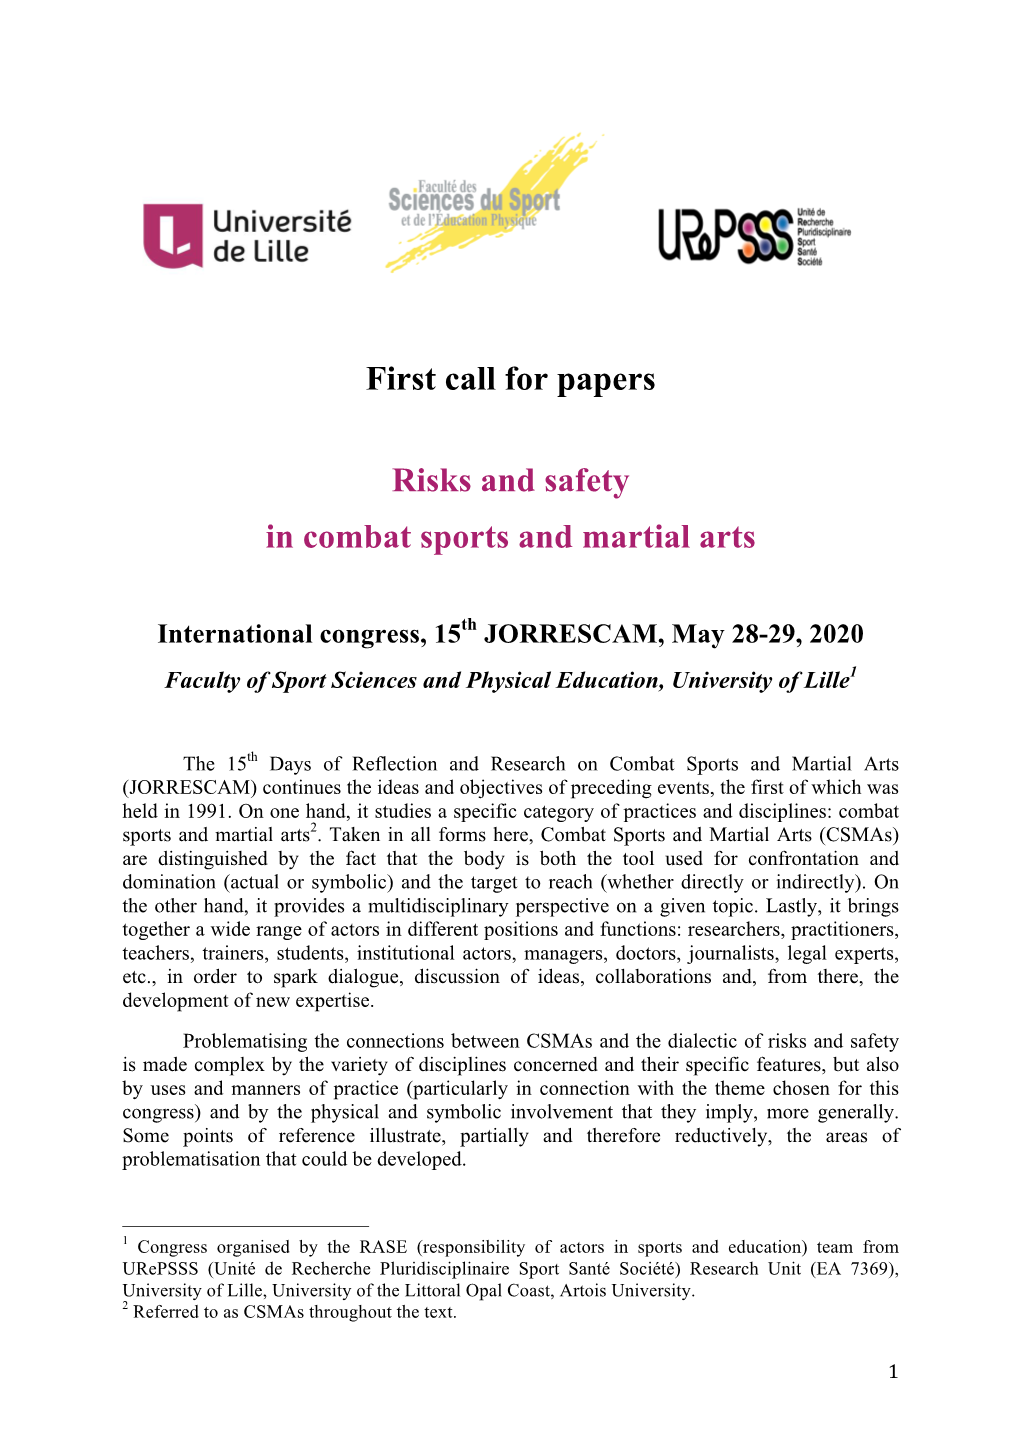 First Call for Papers Risks and Safety in Combat Sports and Martial Arts